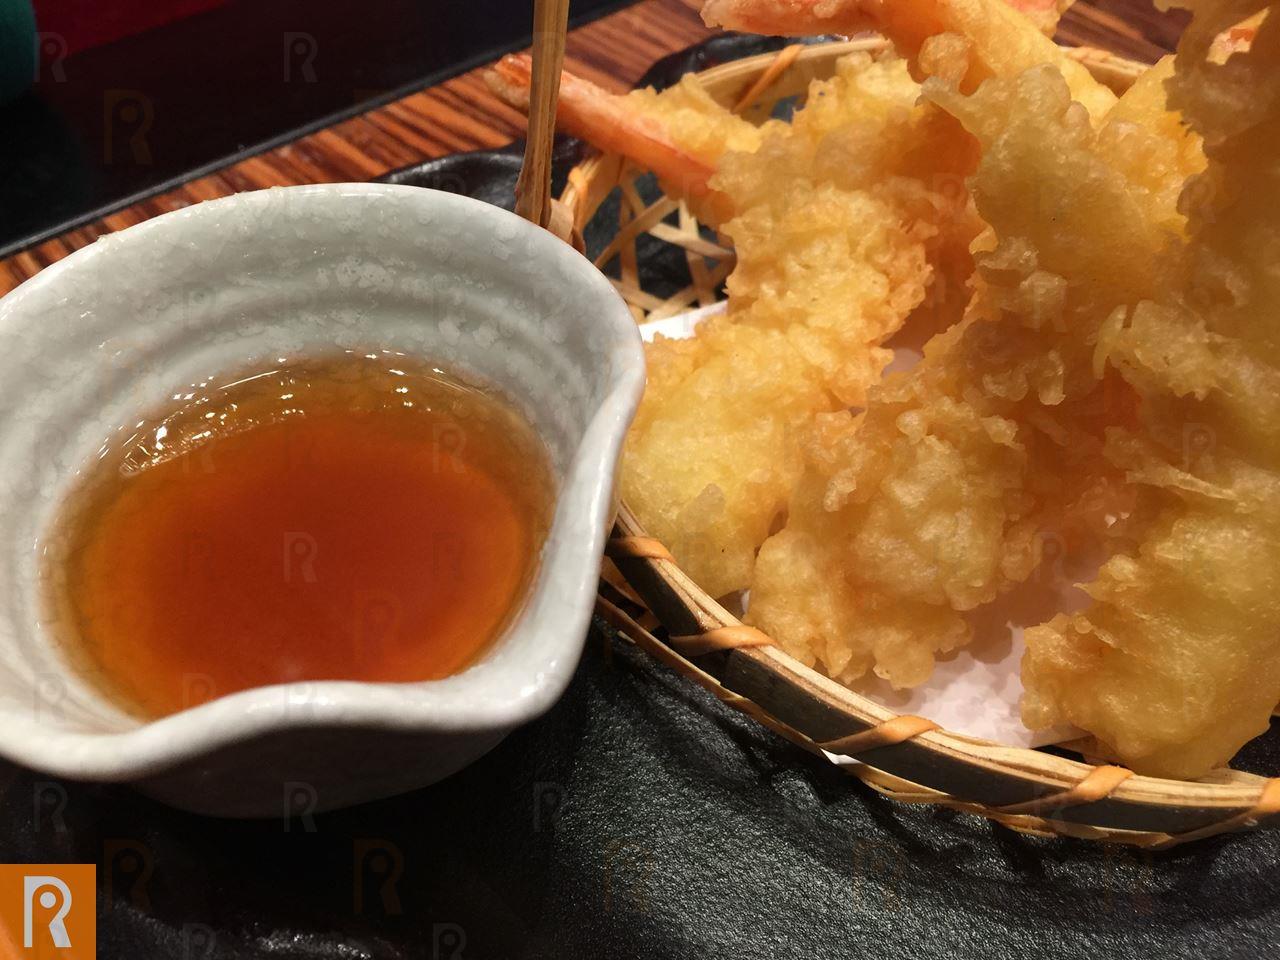 Batter fried shrimps served with tempura dipping sauce